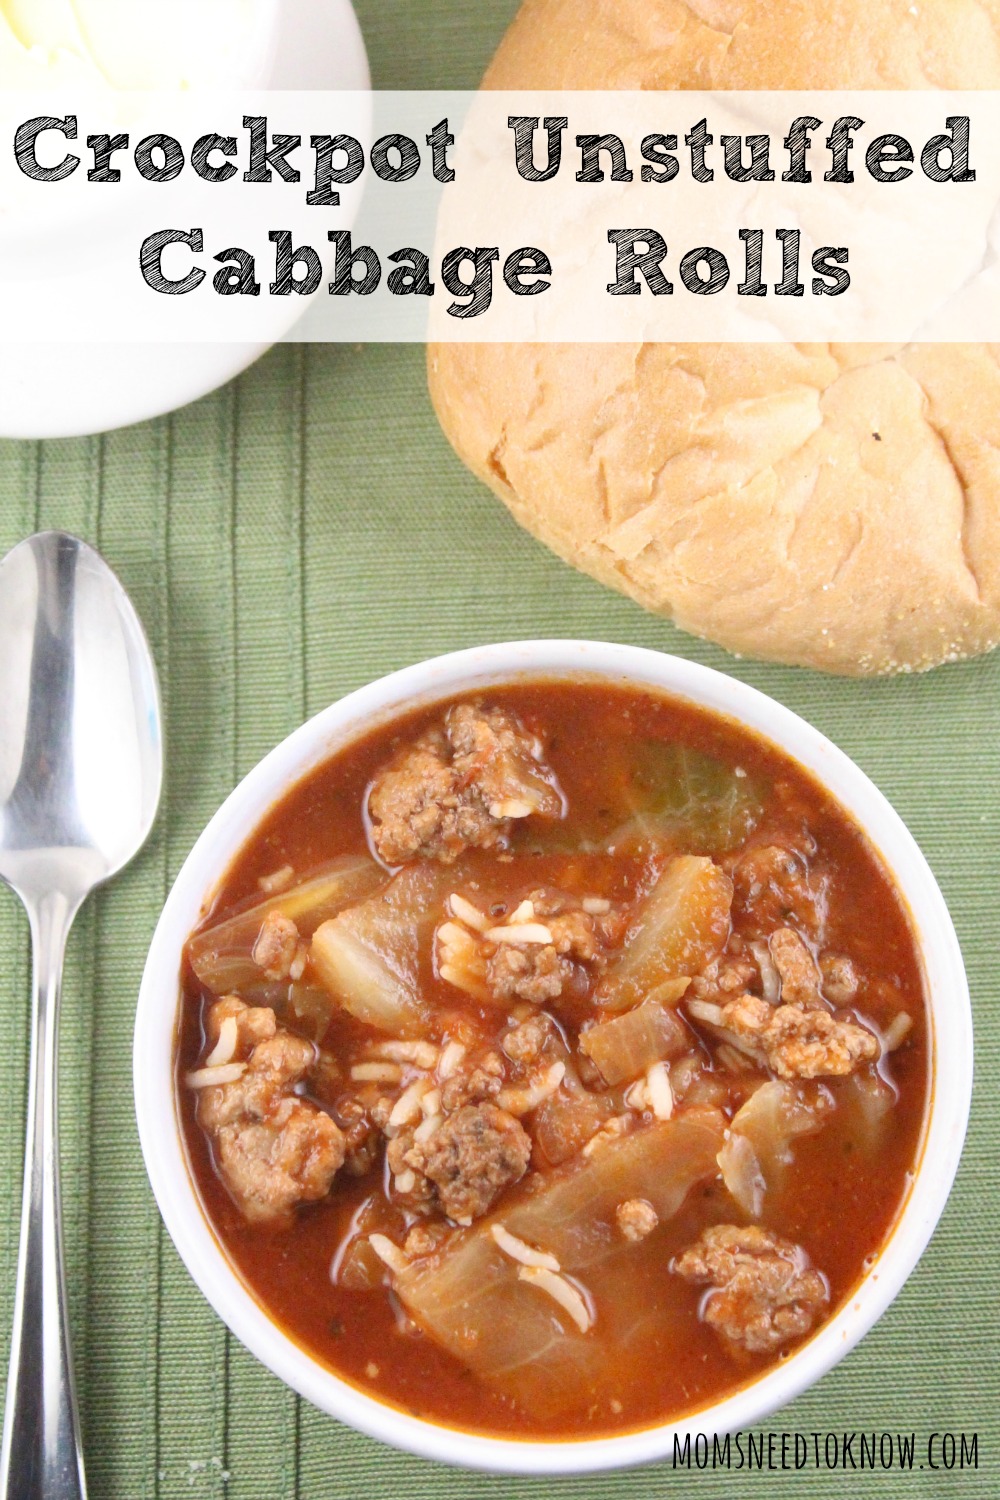 These unstuffed cabbage rolls cook up quite nicely in your crockpot and have all the flavor of traditional cabbage rolls, but only a fraction of the effort!